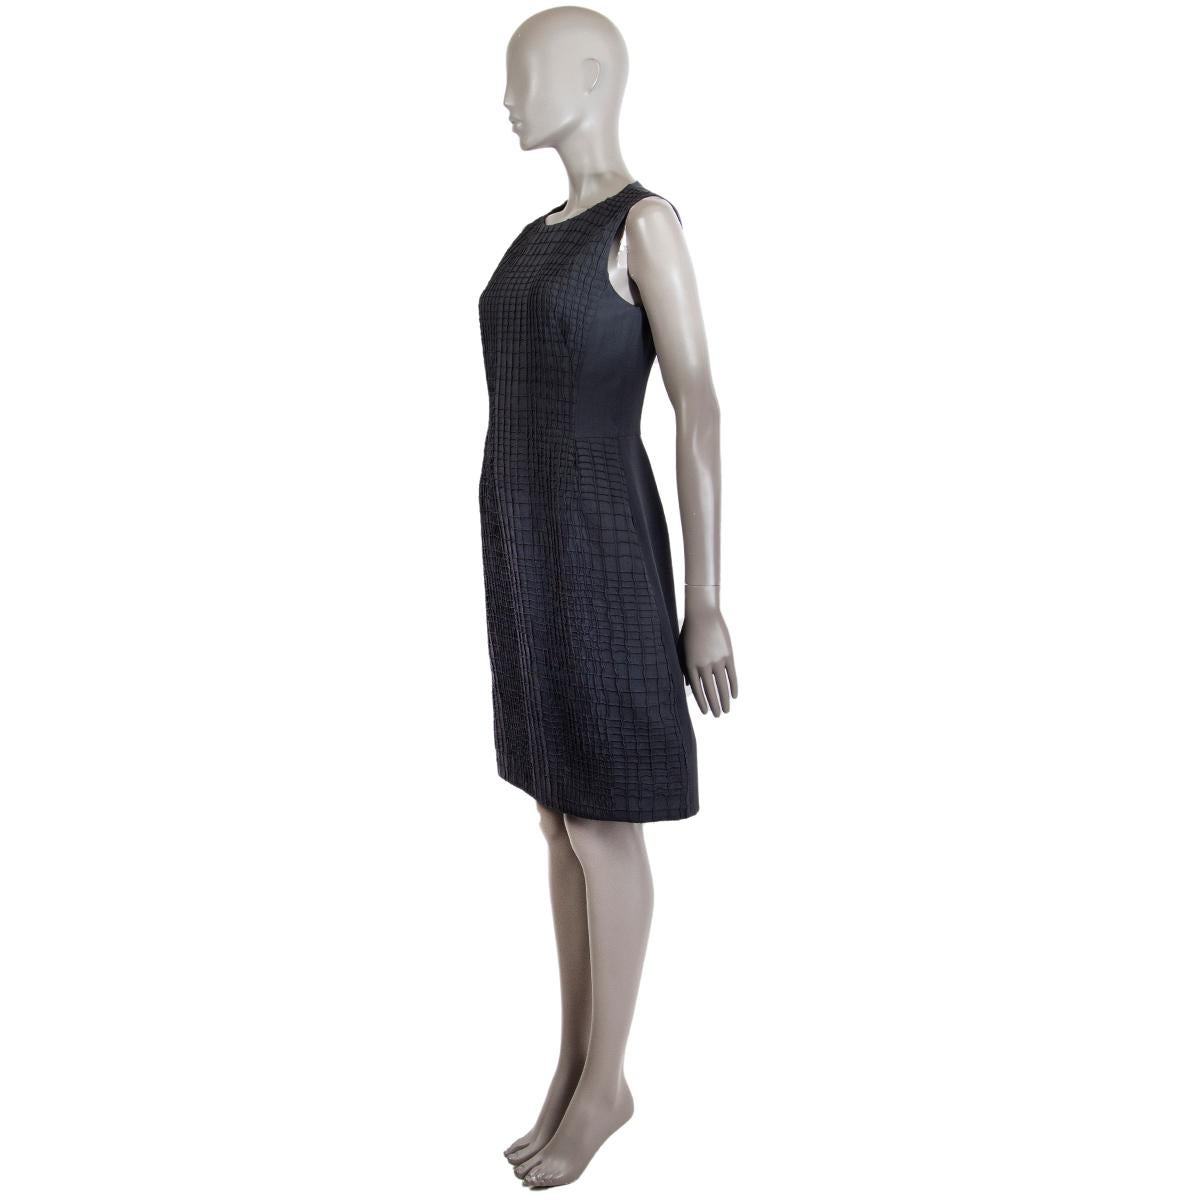 100% authentic Akris sleeveless round-neck sheath dress in dark grey wool (100%) featuring grid-textured front with extra reinforcement around the hemline for more shape. Lined in grey mulberry silk (92%) and elastane (8%). Opens with a zipper on